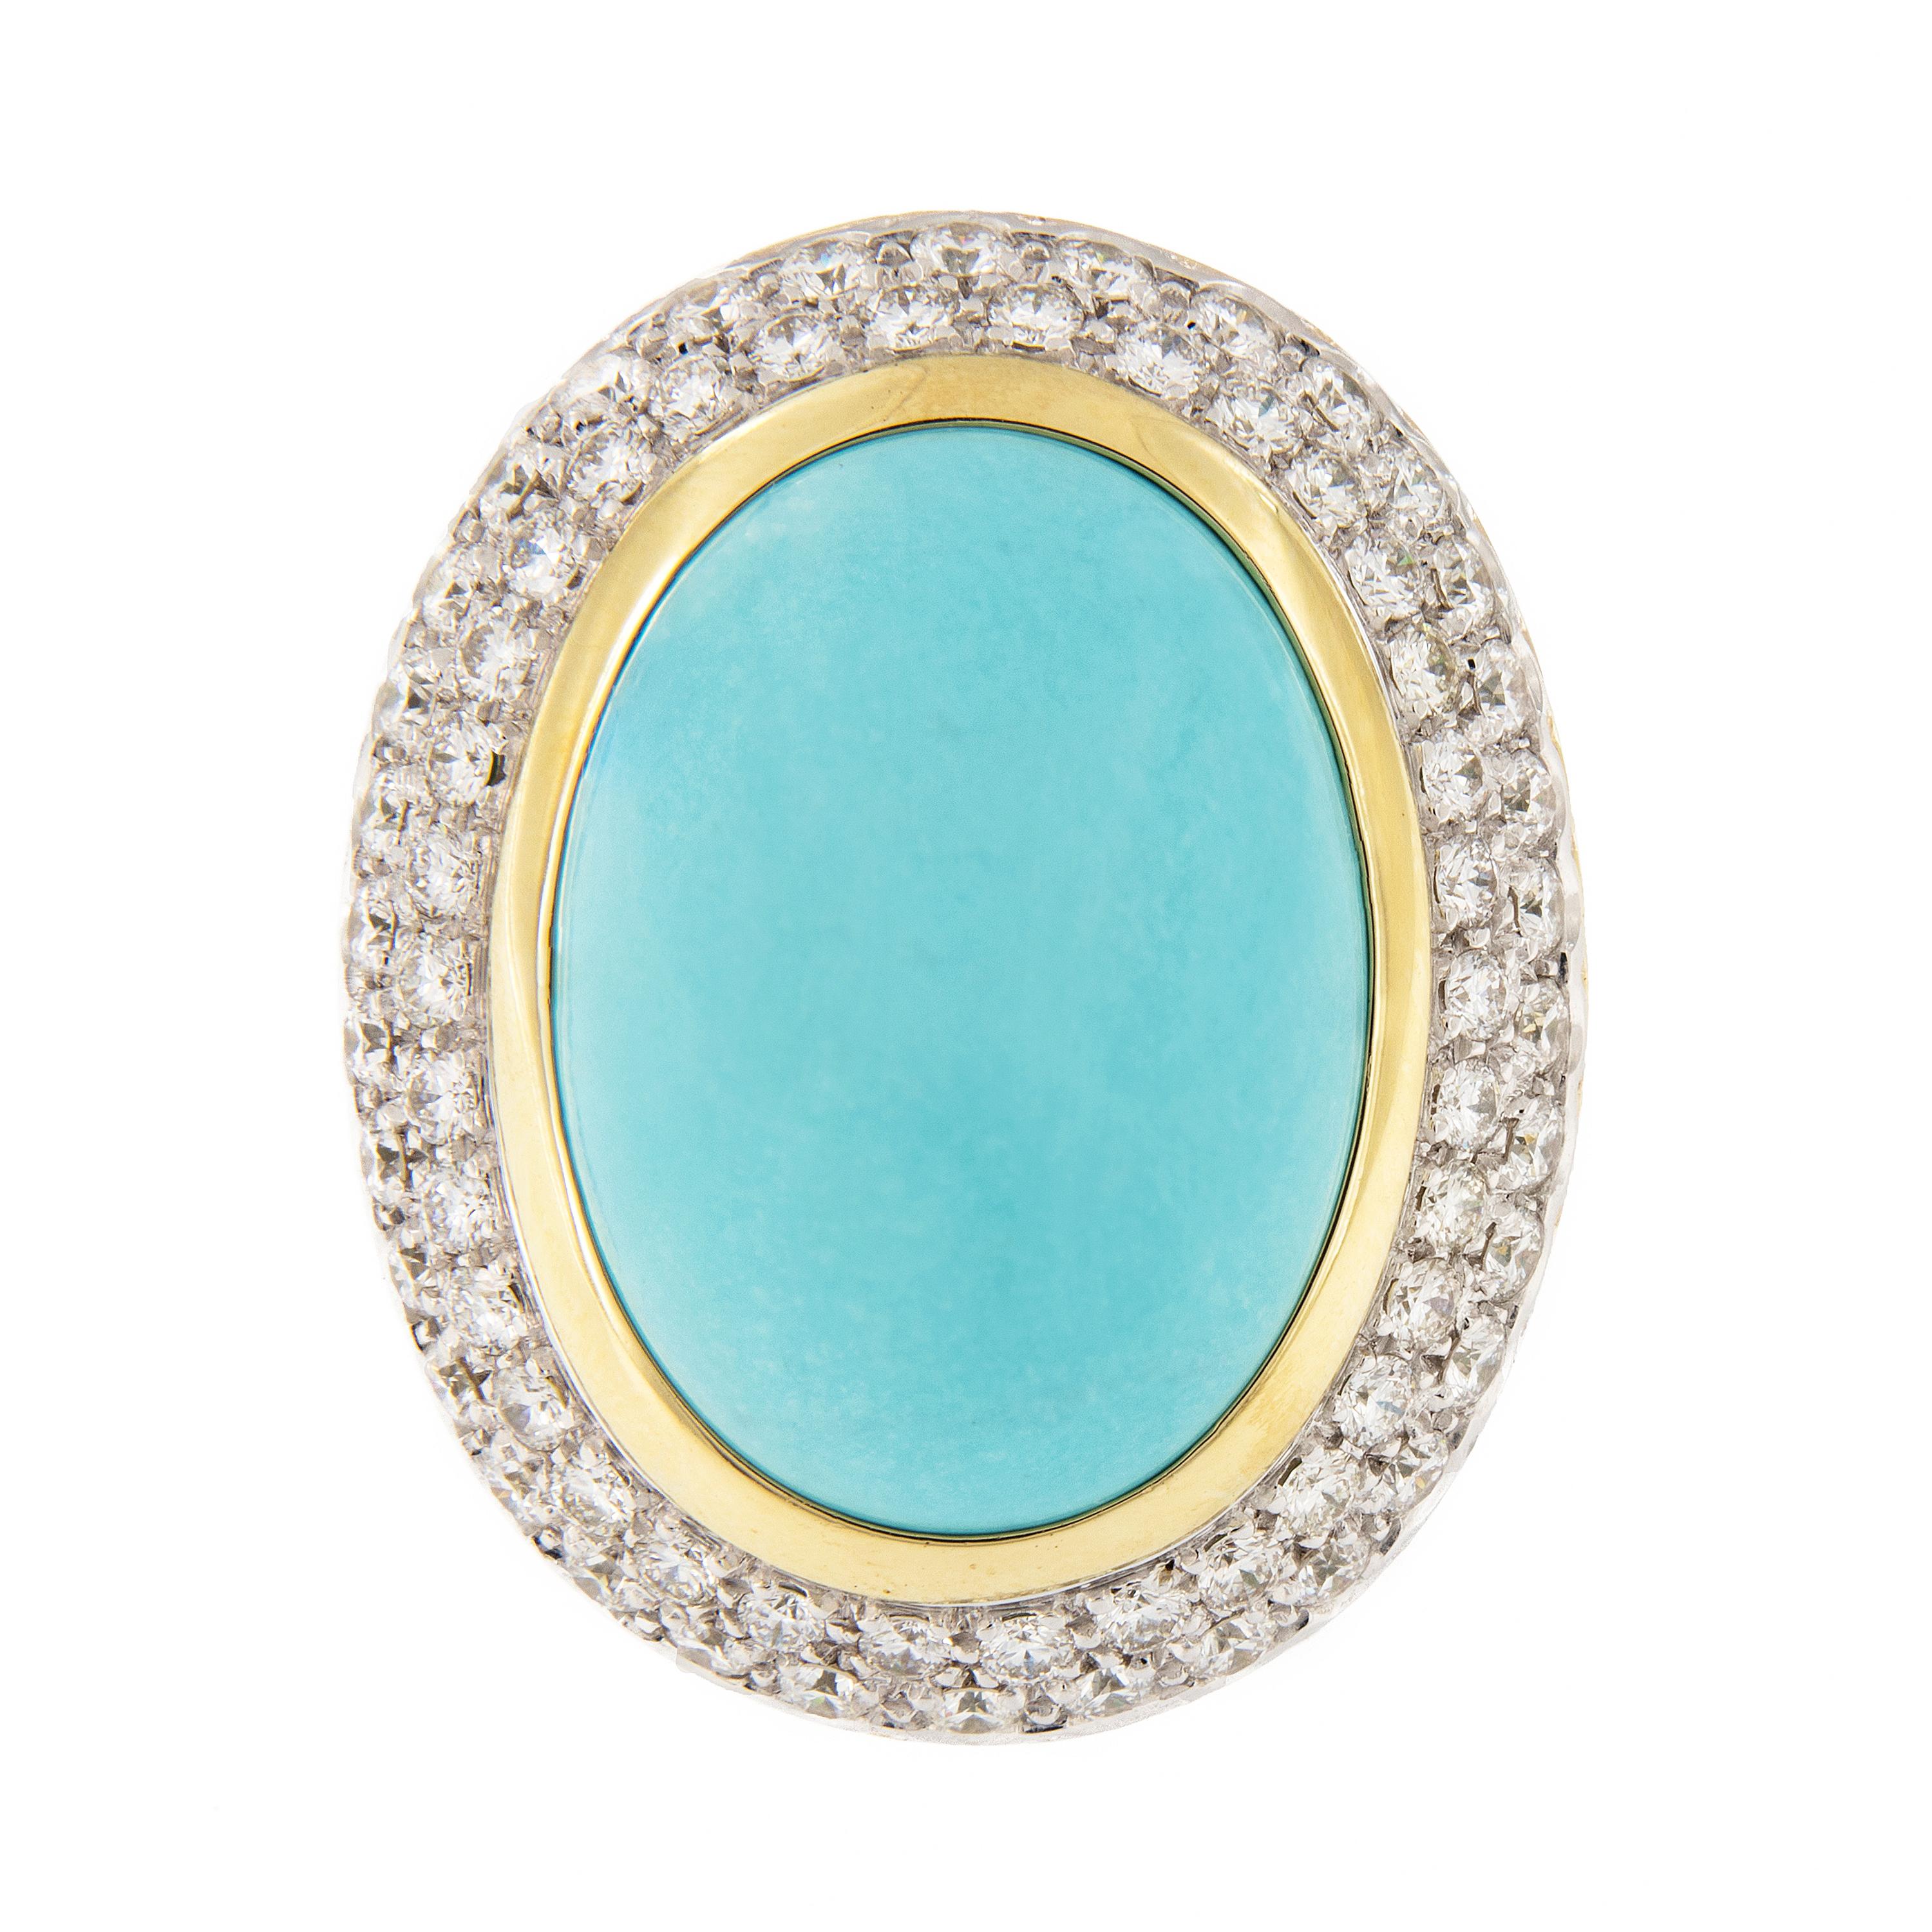 An outstanding display of color and Italian craftsmanship. Persian turquoise is considered the most valuable variety, its robin’s egg blue is arguably the most beautiful turquoise. This ring centers around a cabochon turquoise accented with two